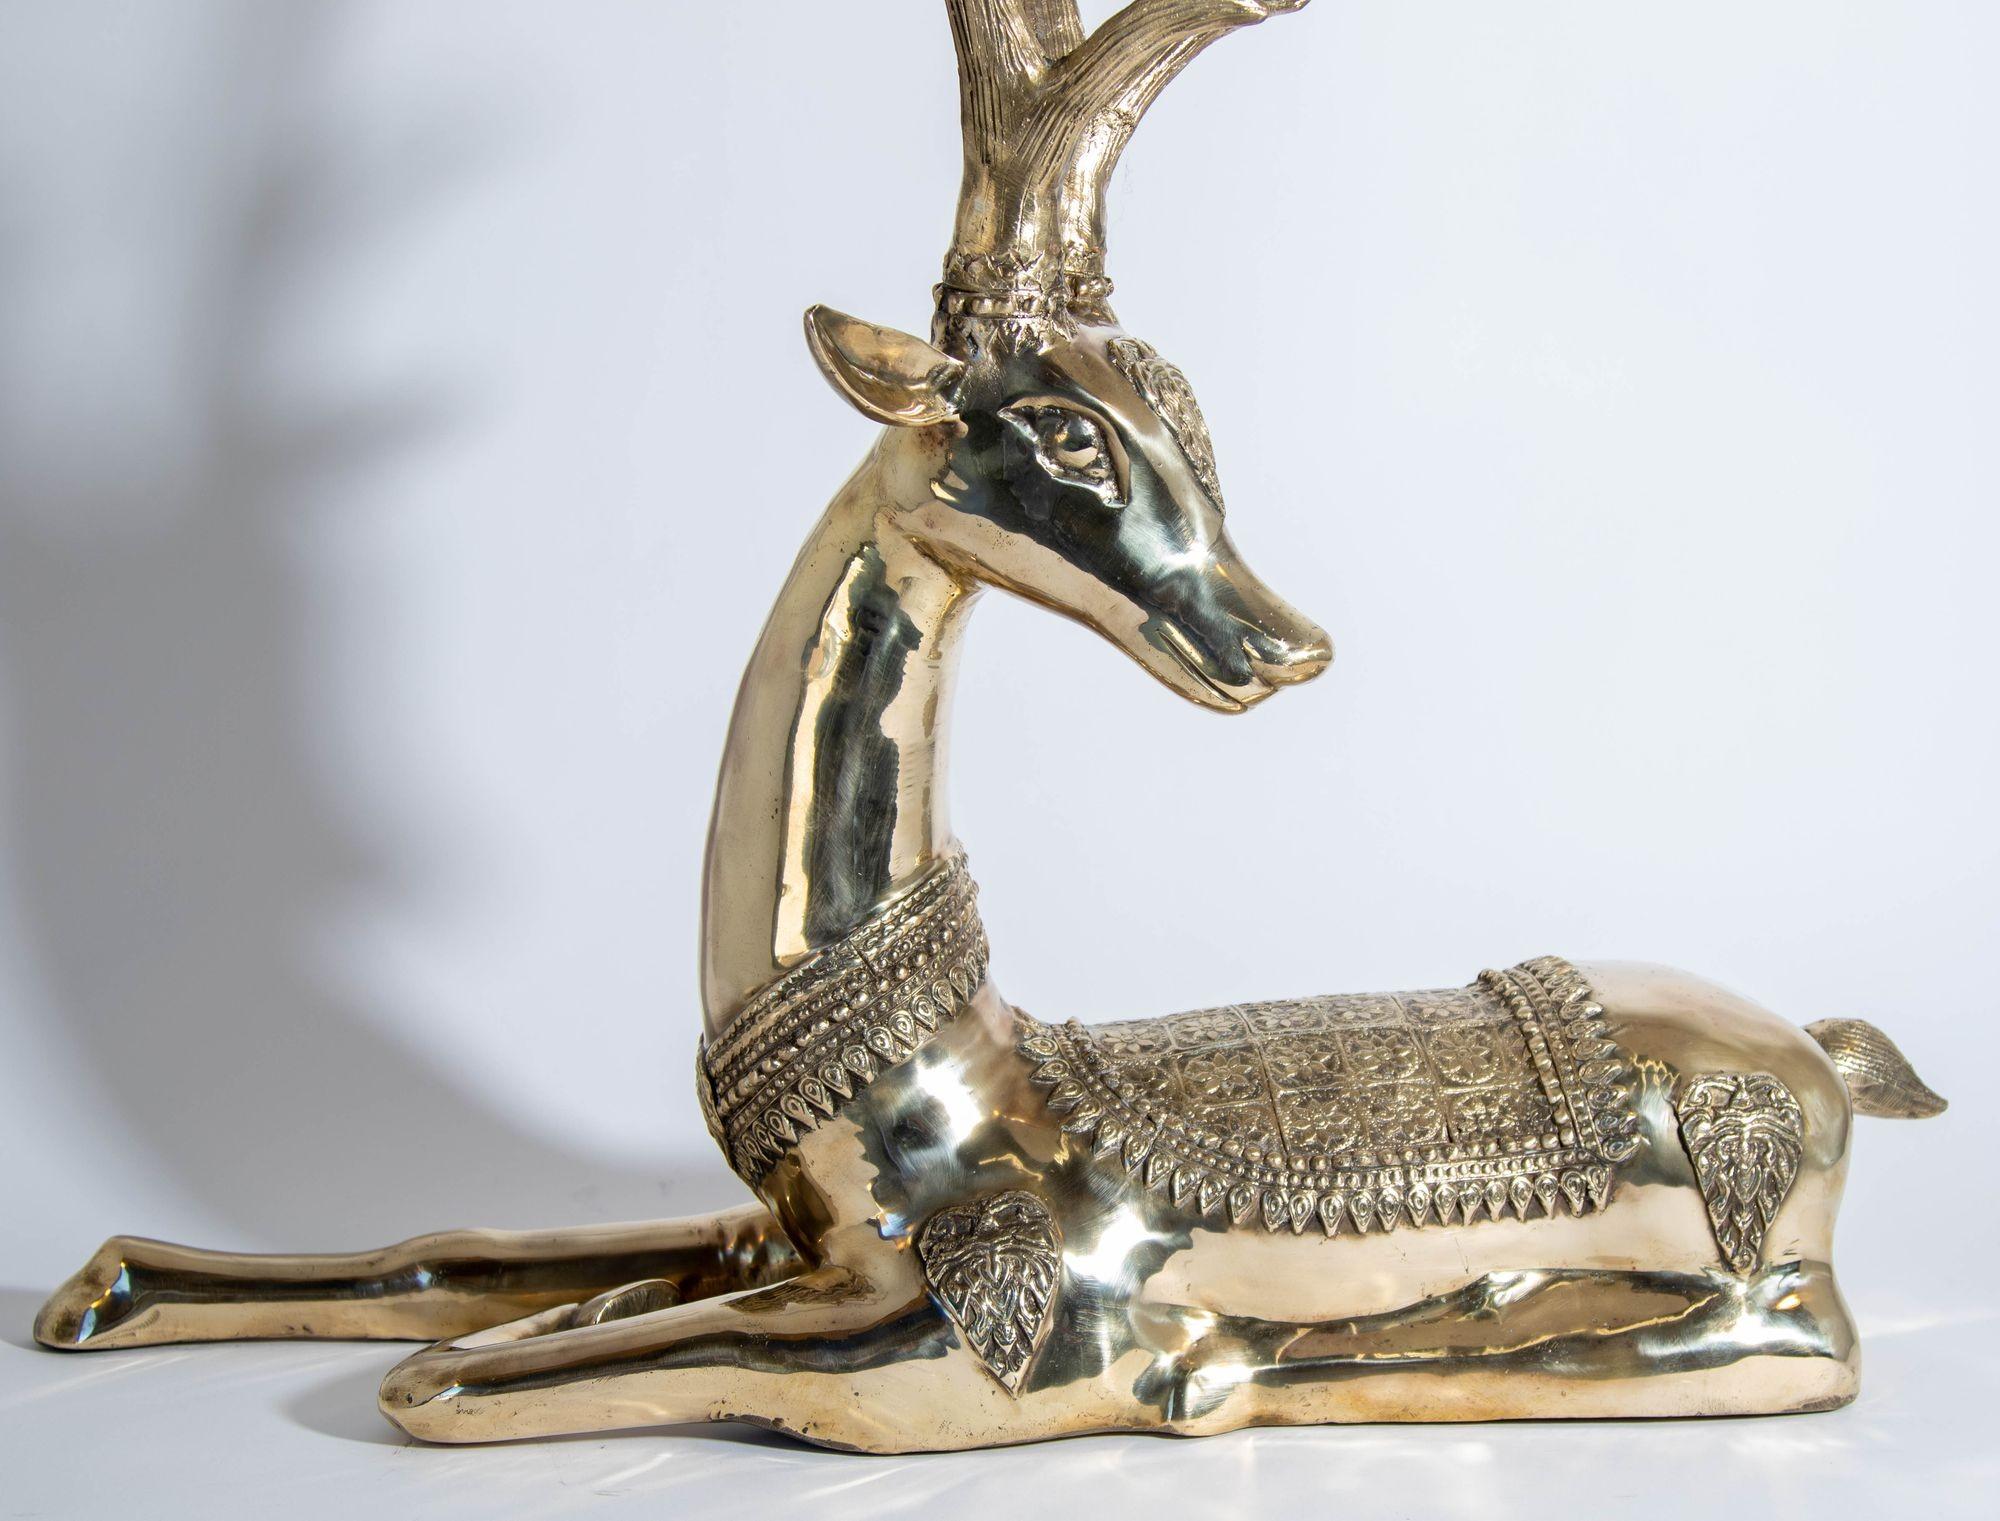 Vintage dramatic and large seated 1960s brass deer with fanciful decoration attributed to Sarreid Ltd.
Large oversized heavy cast brass reclining stag sculpture in solid brass design polished gold color.
Antique gilt cast bronze figure of a